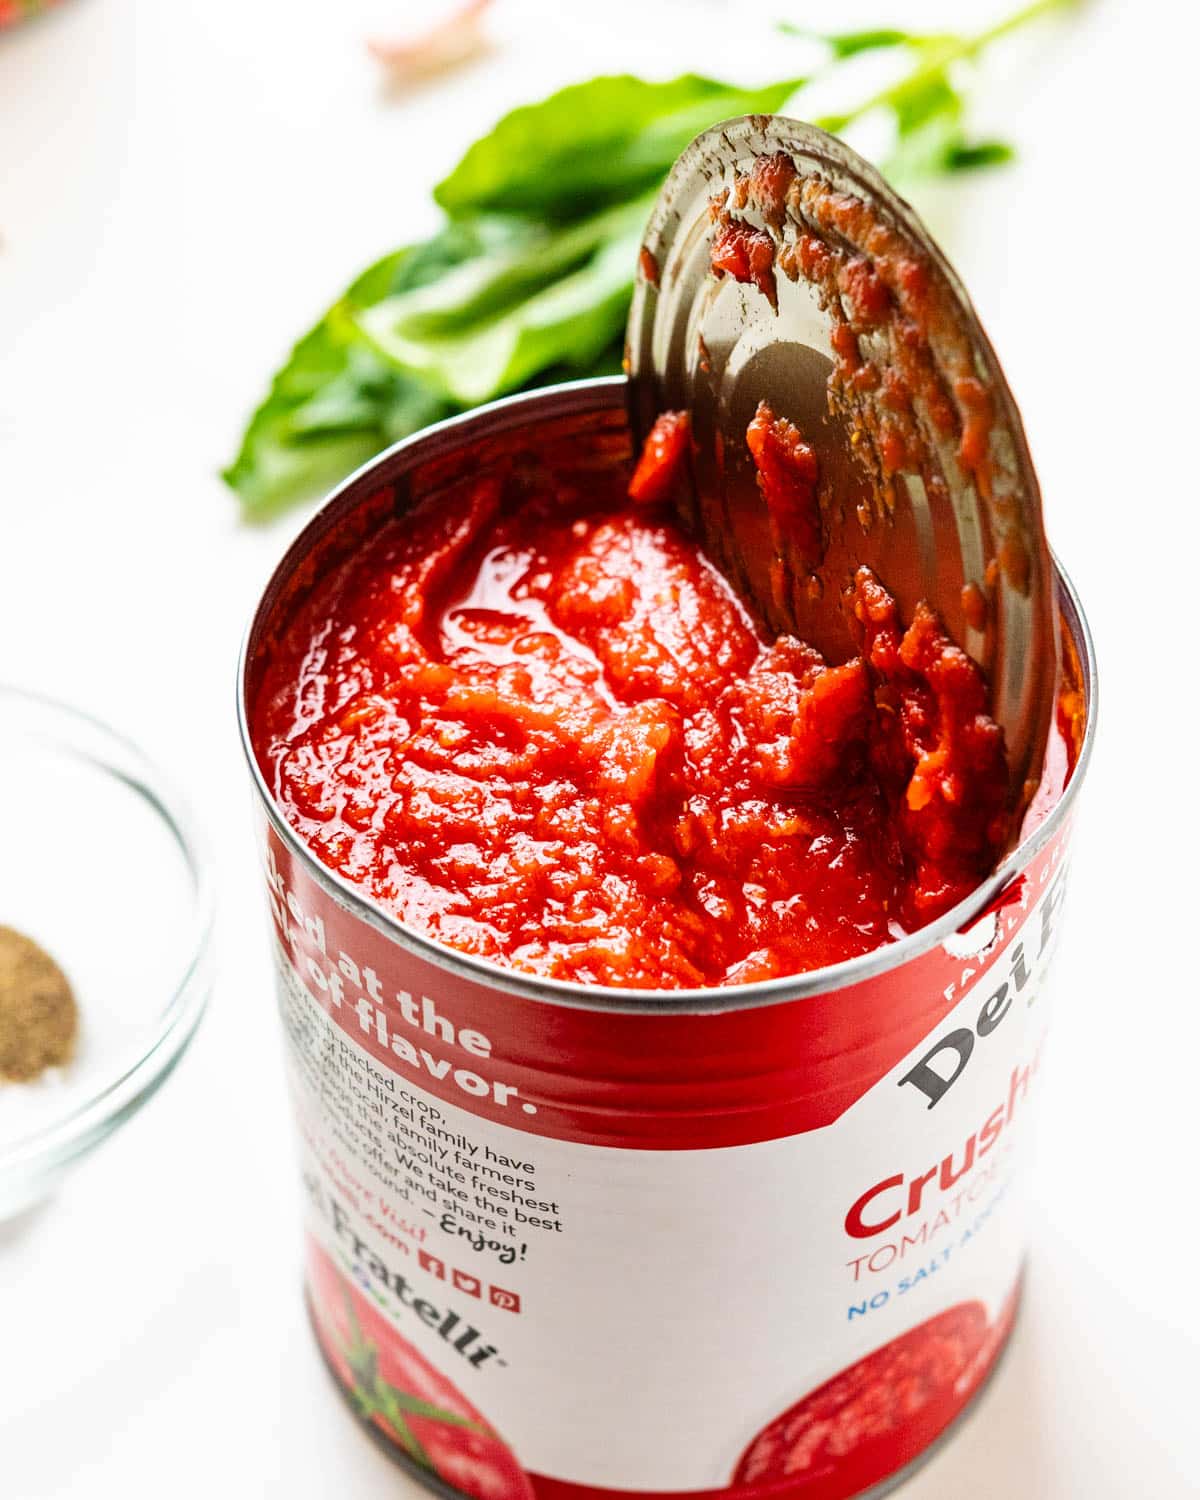 Opening a can of crushed tomatoes.